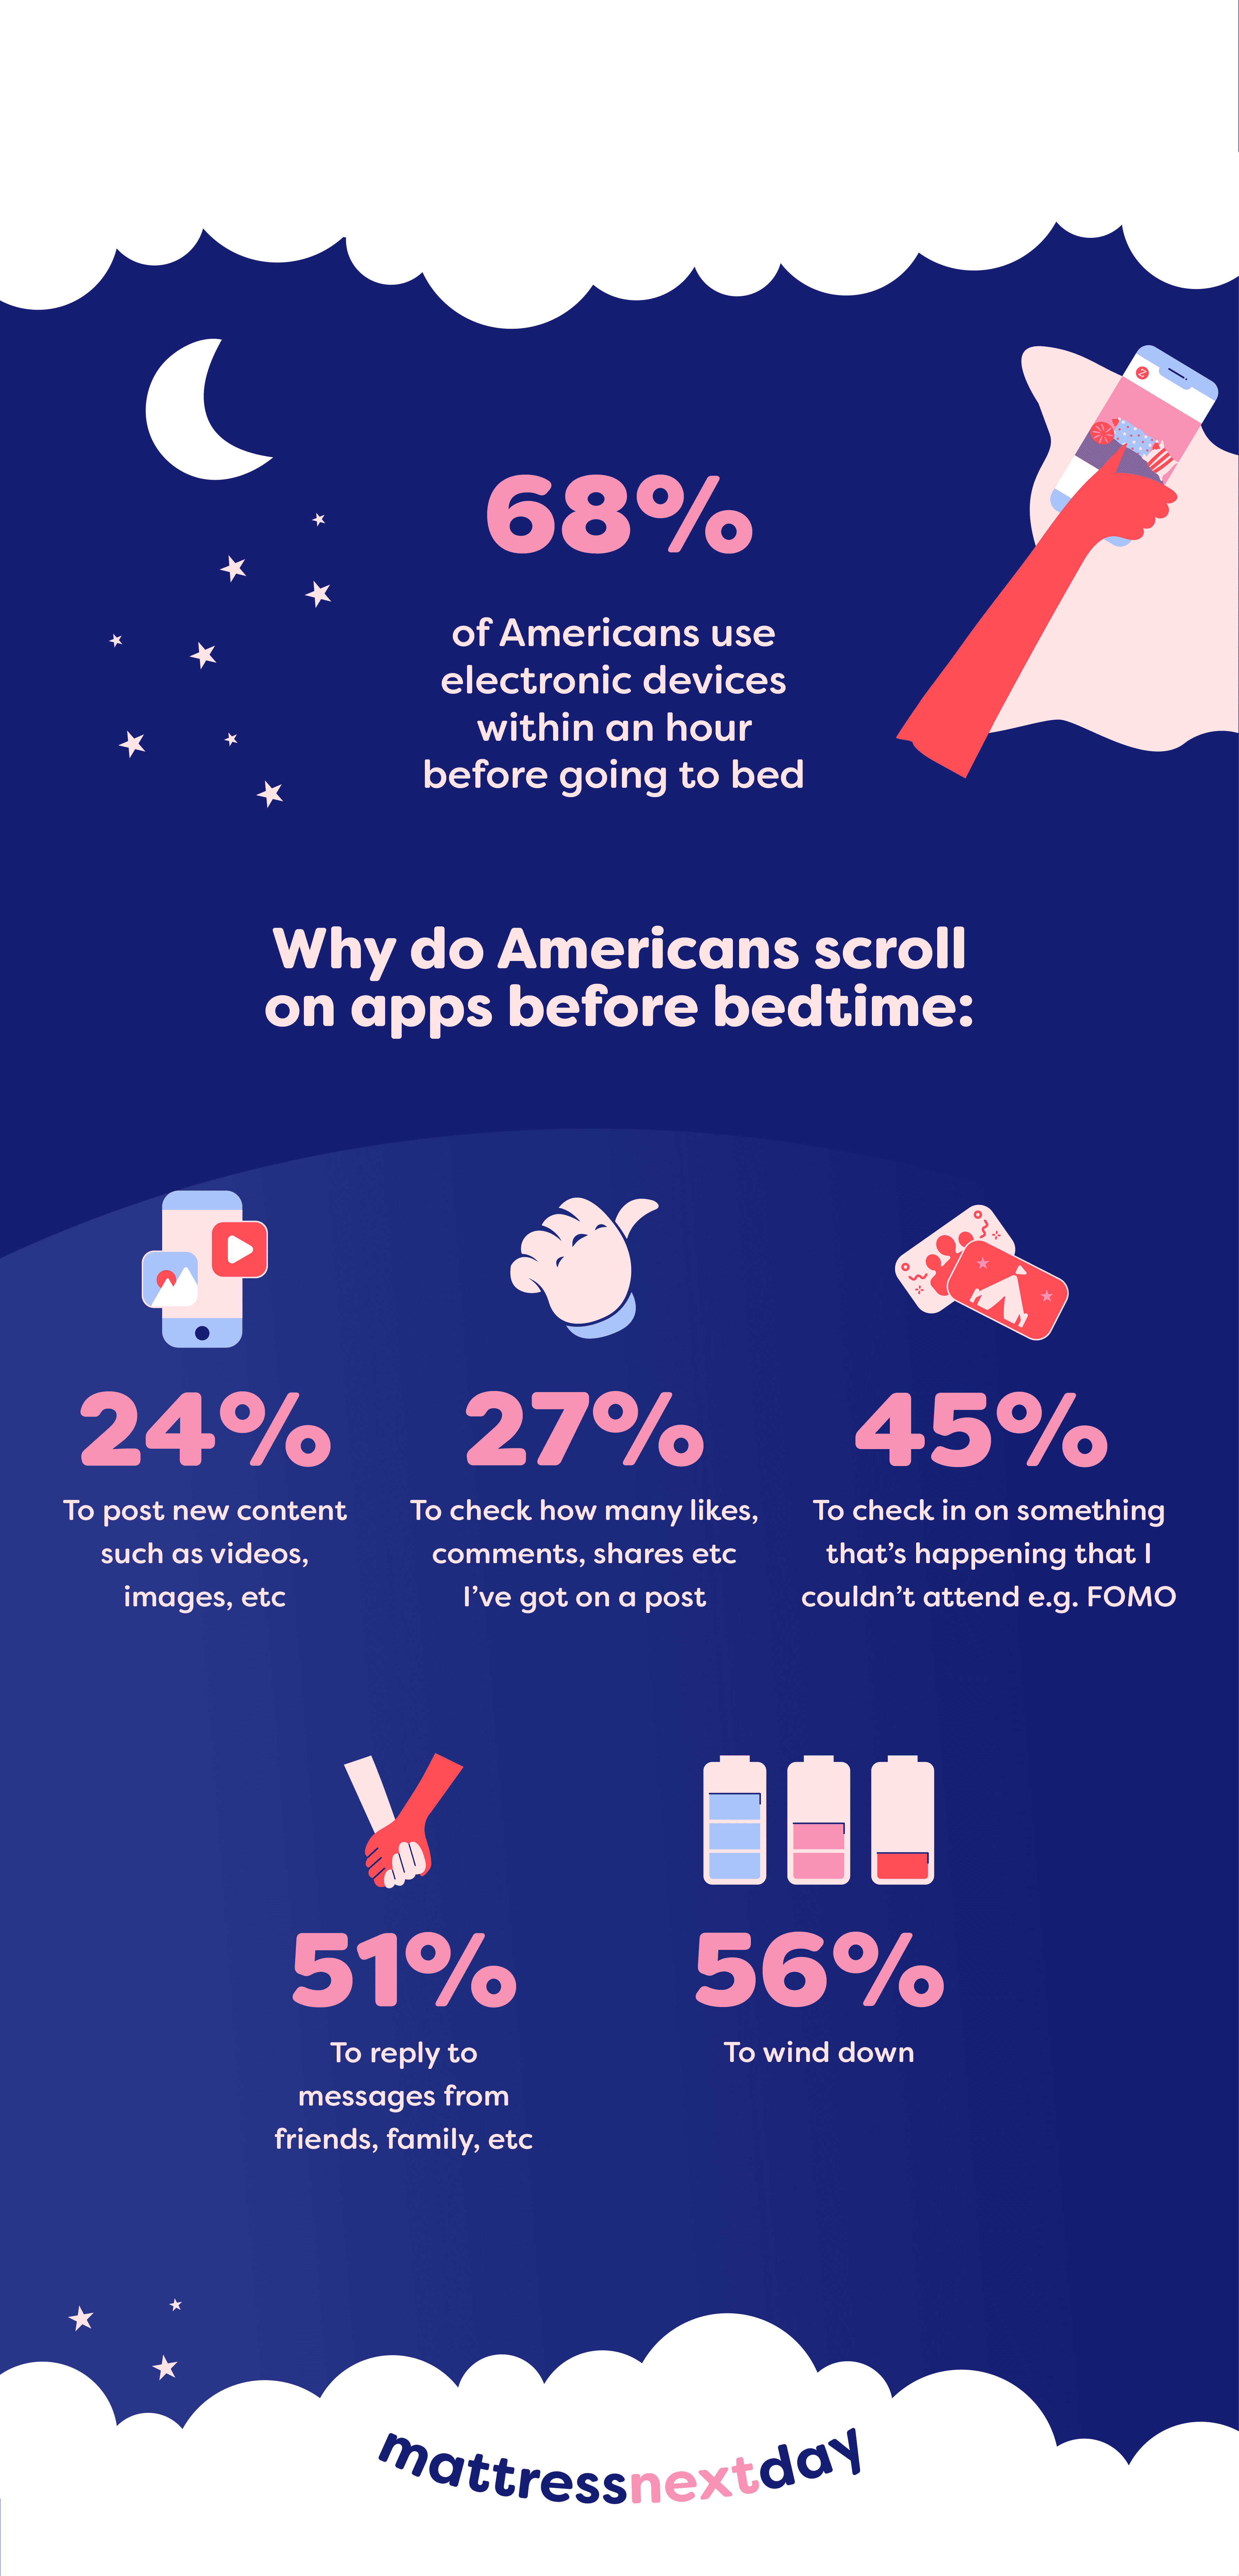 Infographic depicting the reasons Americans use their phones before bed.